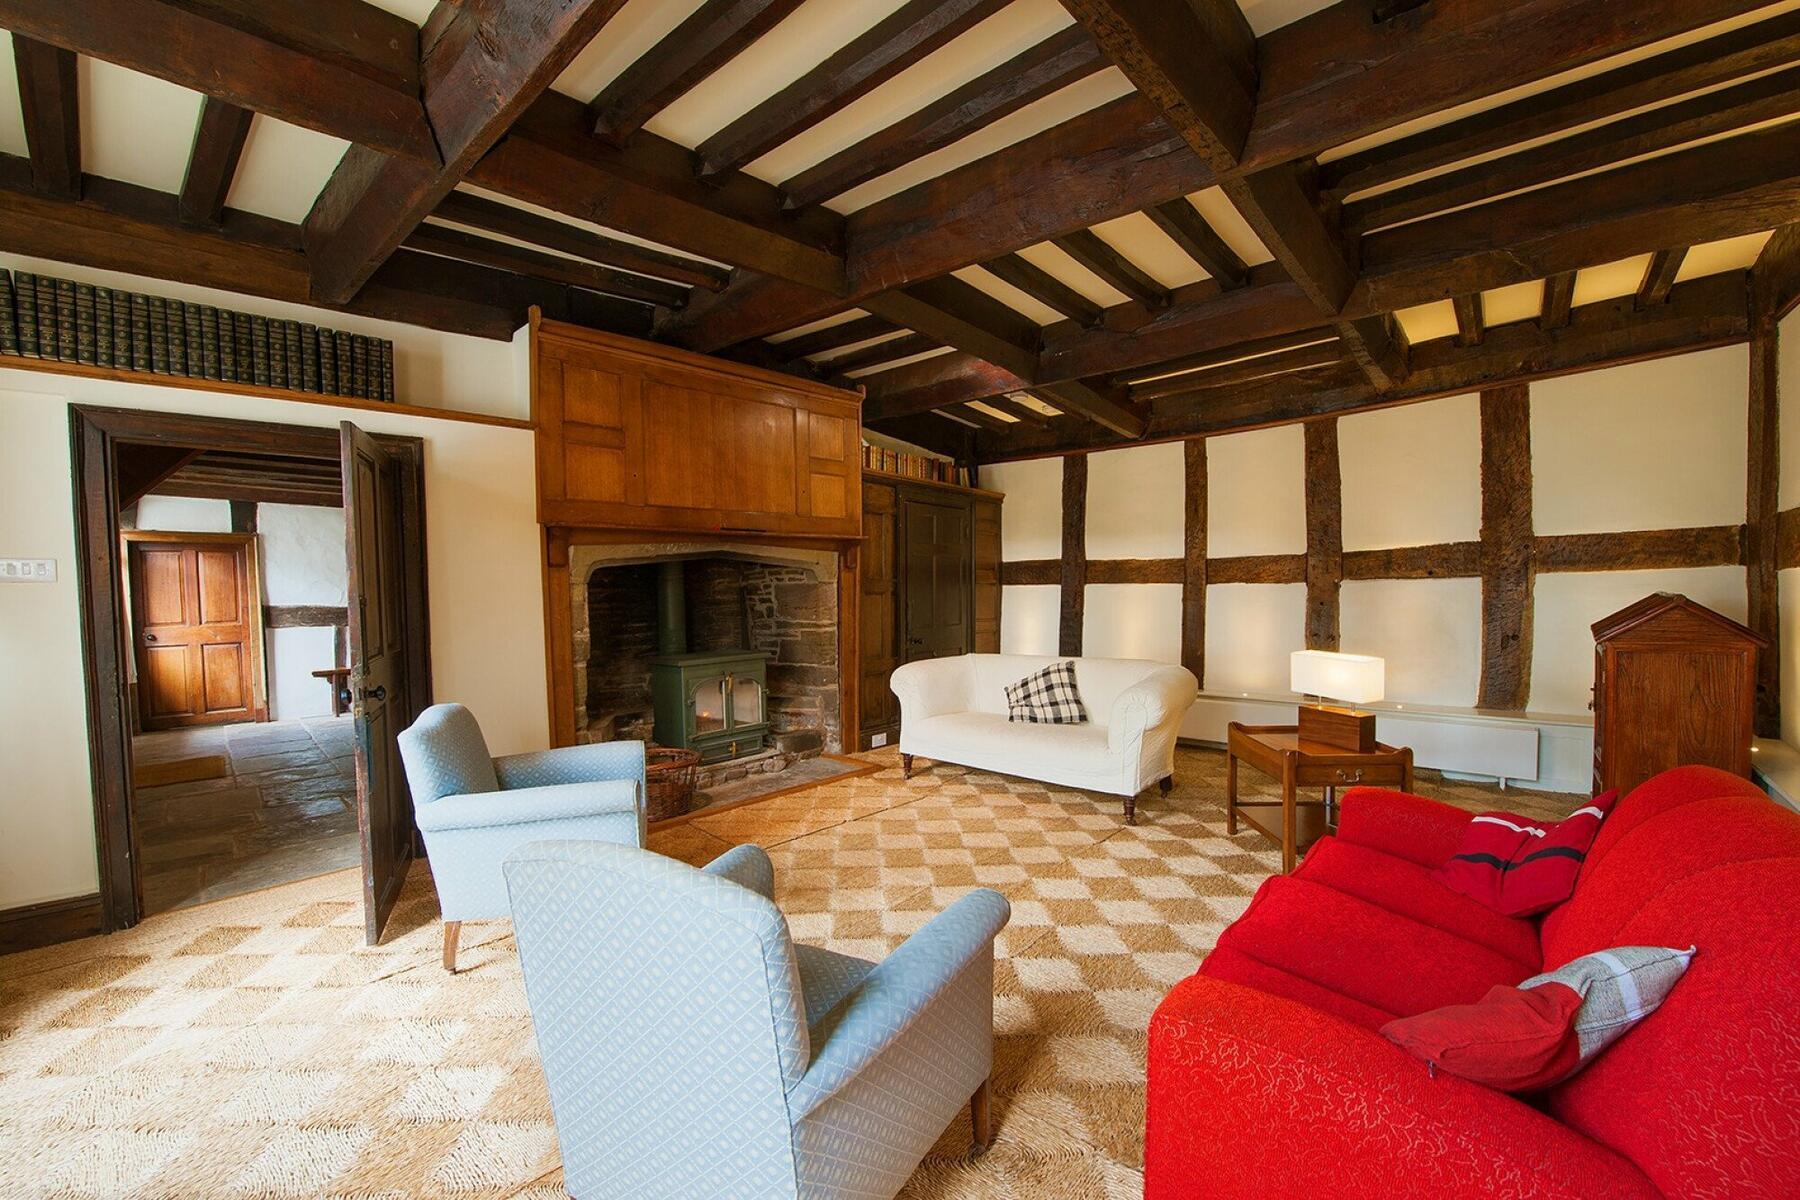 The 16th century drawing room, with its chequerboard ceiling